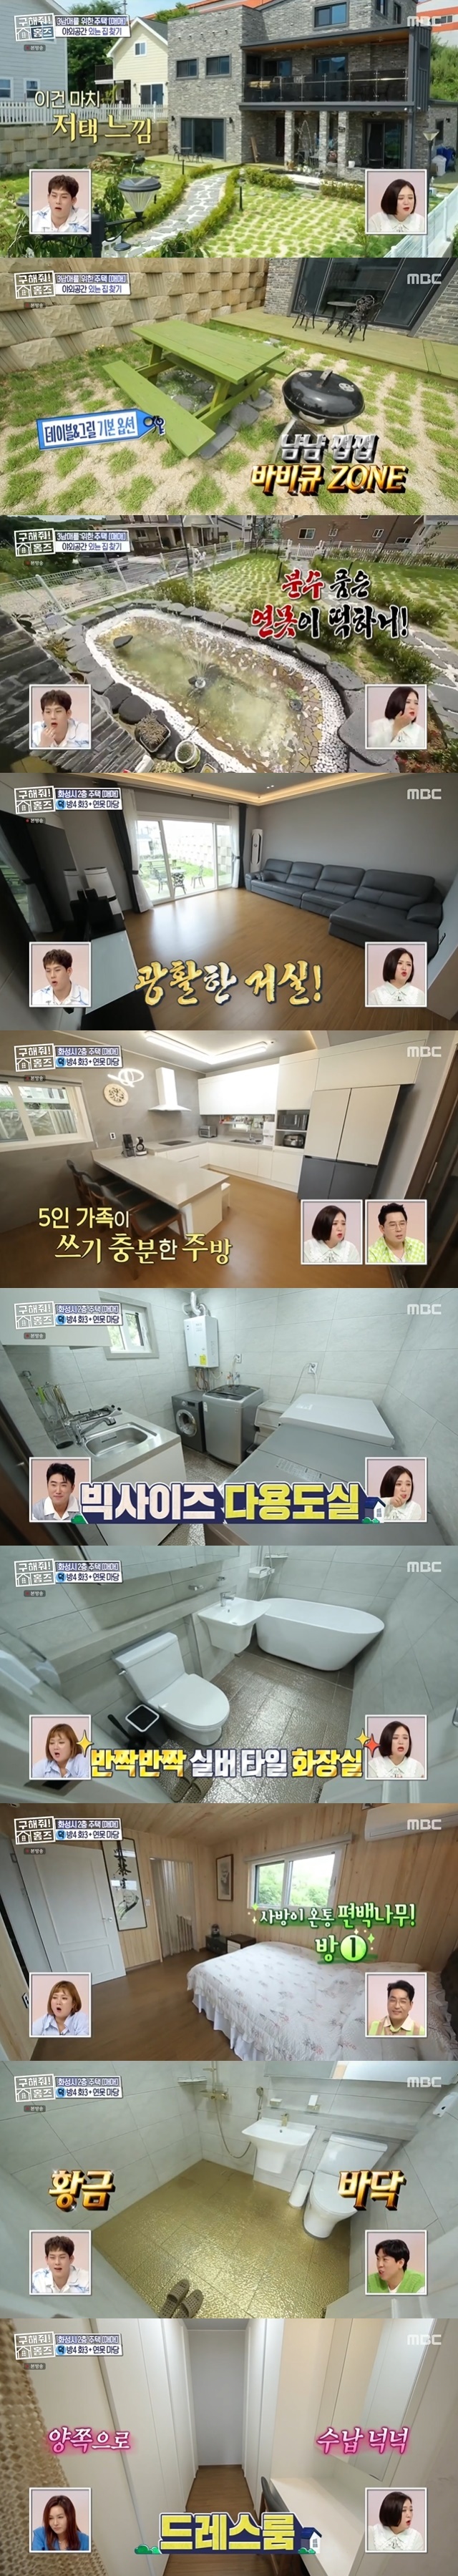 The Innocents sale with a Fountain pond in Madang has been introduced.In the 120th MBC entertainment Where is My Home (hereinafter referred to as Homes) broadcast on August 22, a couple came to The Client to find a house where three brothers and sisters of two years old in Dongtan, Gyeonggi Province and Gwangju area can play freely.The budget was hoped for a charter or marketing 6-7 billion won, three rooms and two or more toilets, and a daycare center and an elementary school within 10 minutes of the vehicle.Duck Team Cody Hadokwon, Yang Se-chan headed to Sagok-ri, Jangan-myeon, Mars.Within 10 minutes of the car, the single-family house with a daycare center, an elementary school, and a middle school was impressed by the first entrance to the playground class Madang.In Madang, barbecue grills and tables were the basic options.The real highlight of the house was a pond with a fortune; the house was named Golden Pond House because the pond is decorated with golden tiles.If you raise three children, it can always be a busy and busy routine, and if you are here, even he will be very relaxed, said Hadokwon.The interior was also very good: the living room of Madang View Tongchang on the first floor, the Diza The Kitchen, the bathroom with the bathtub, and the white-backed room impressed Yang Se-chan.Big-size multipurpose rooms and assistant The Kitchen also existed.